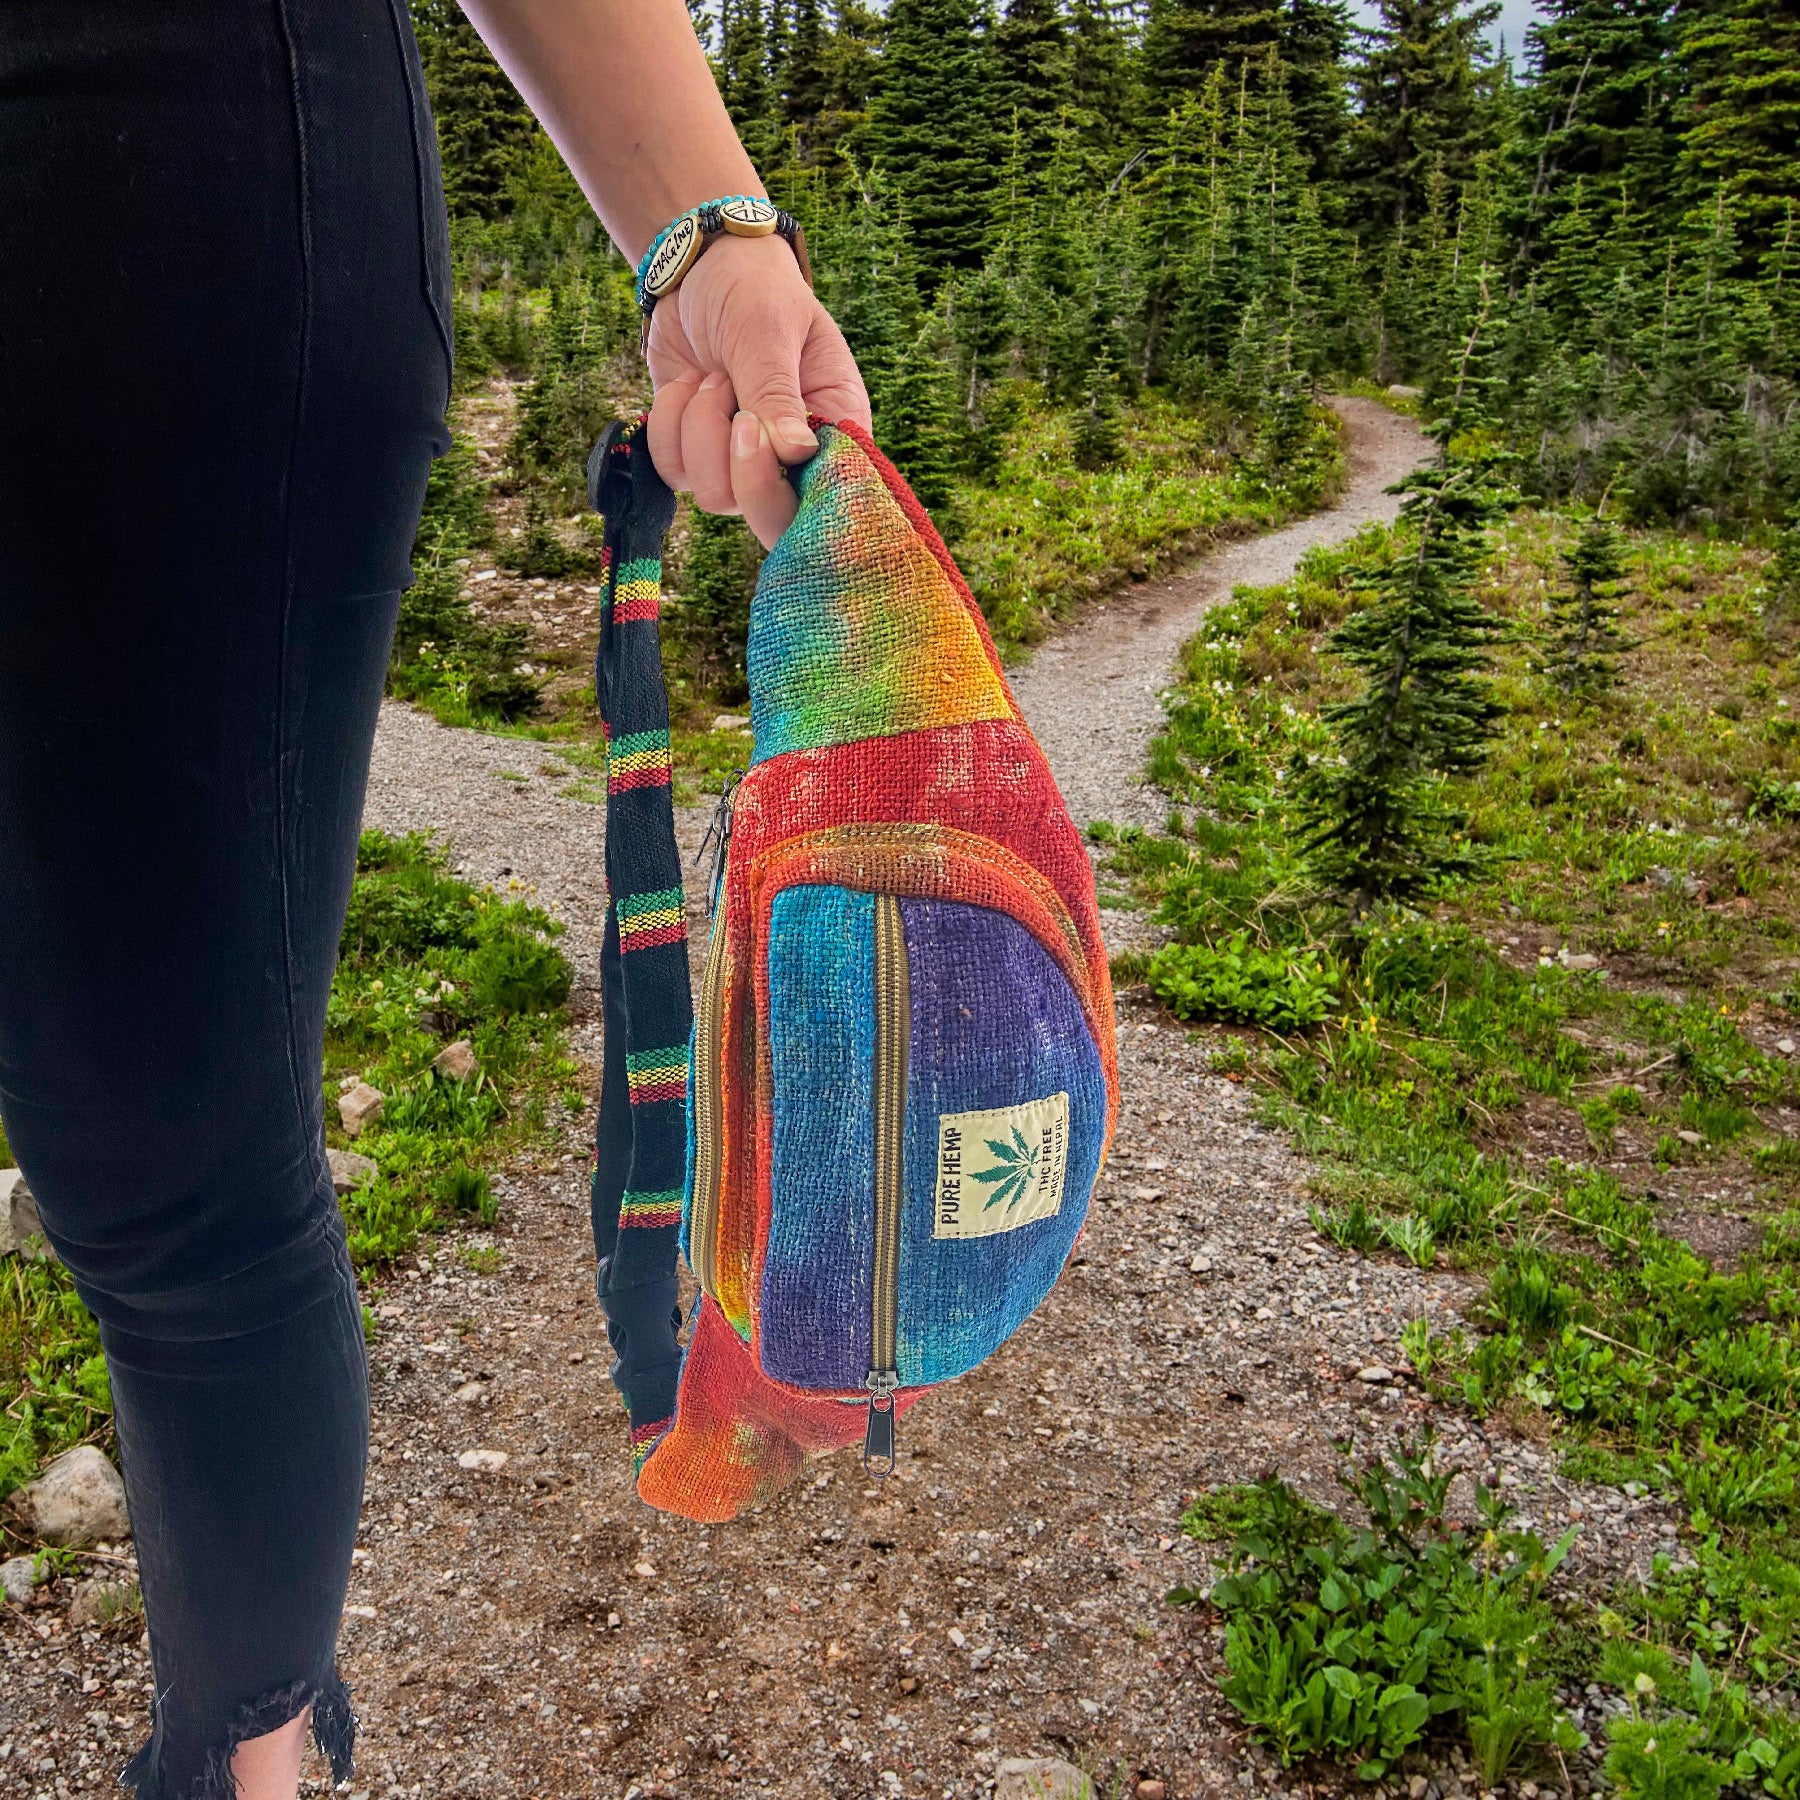 Tie Dye Pattern Multi-compartment Fanny Pack